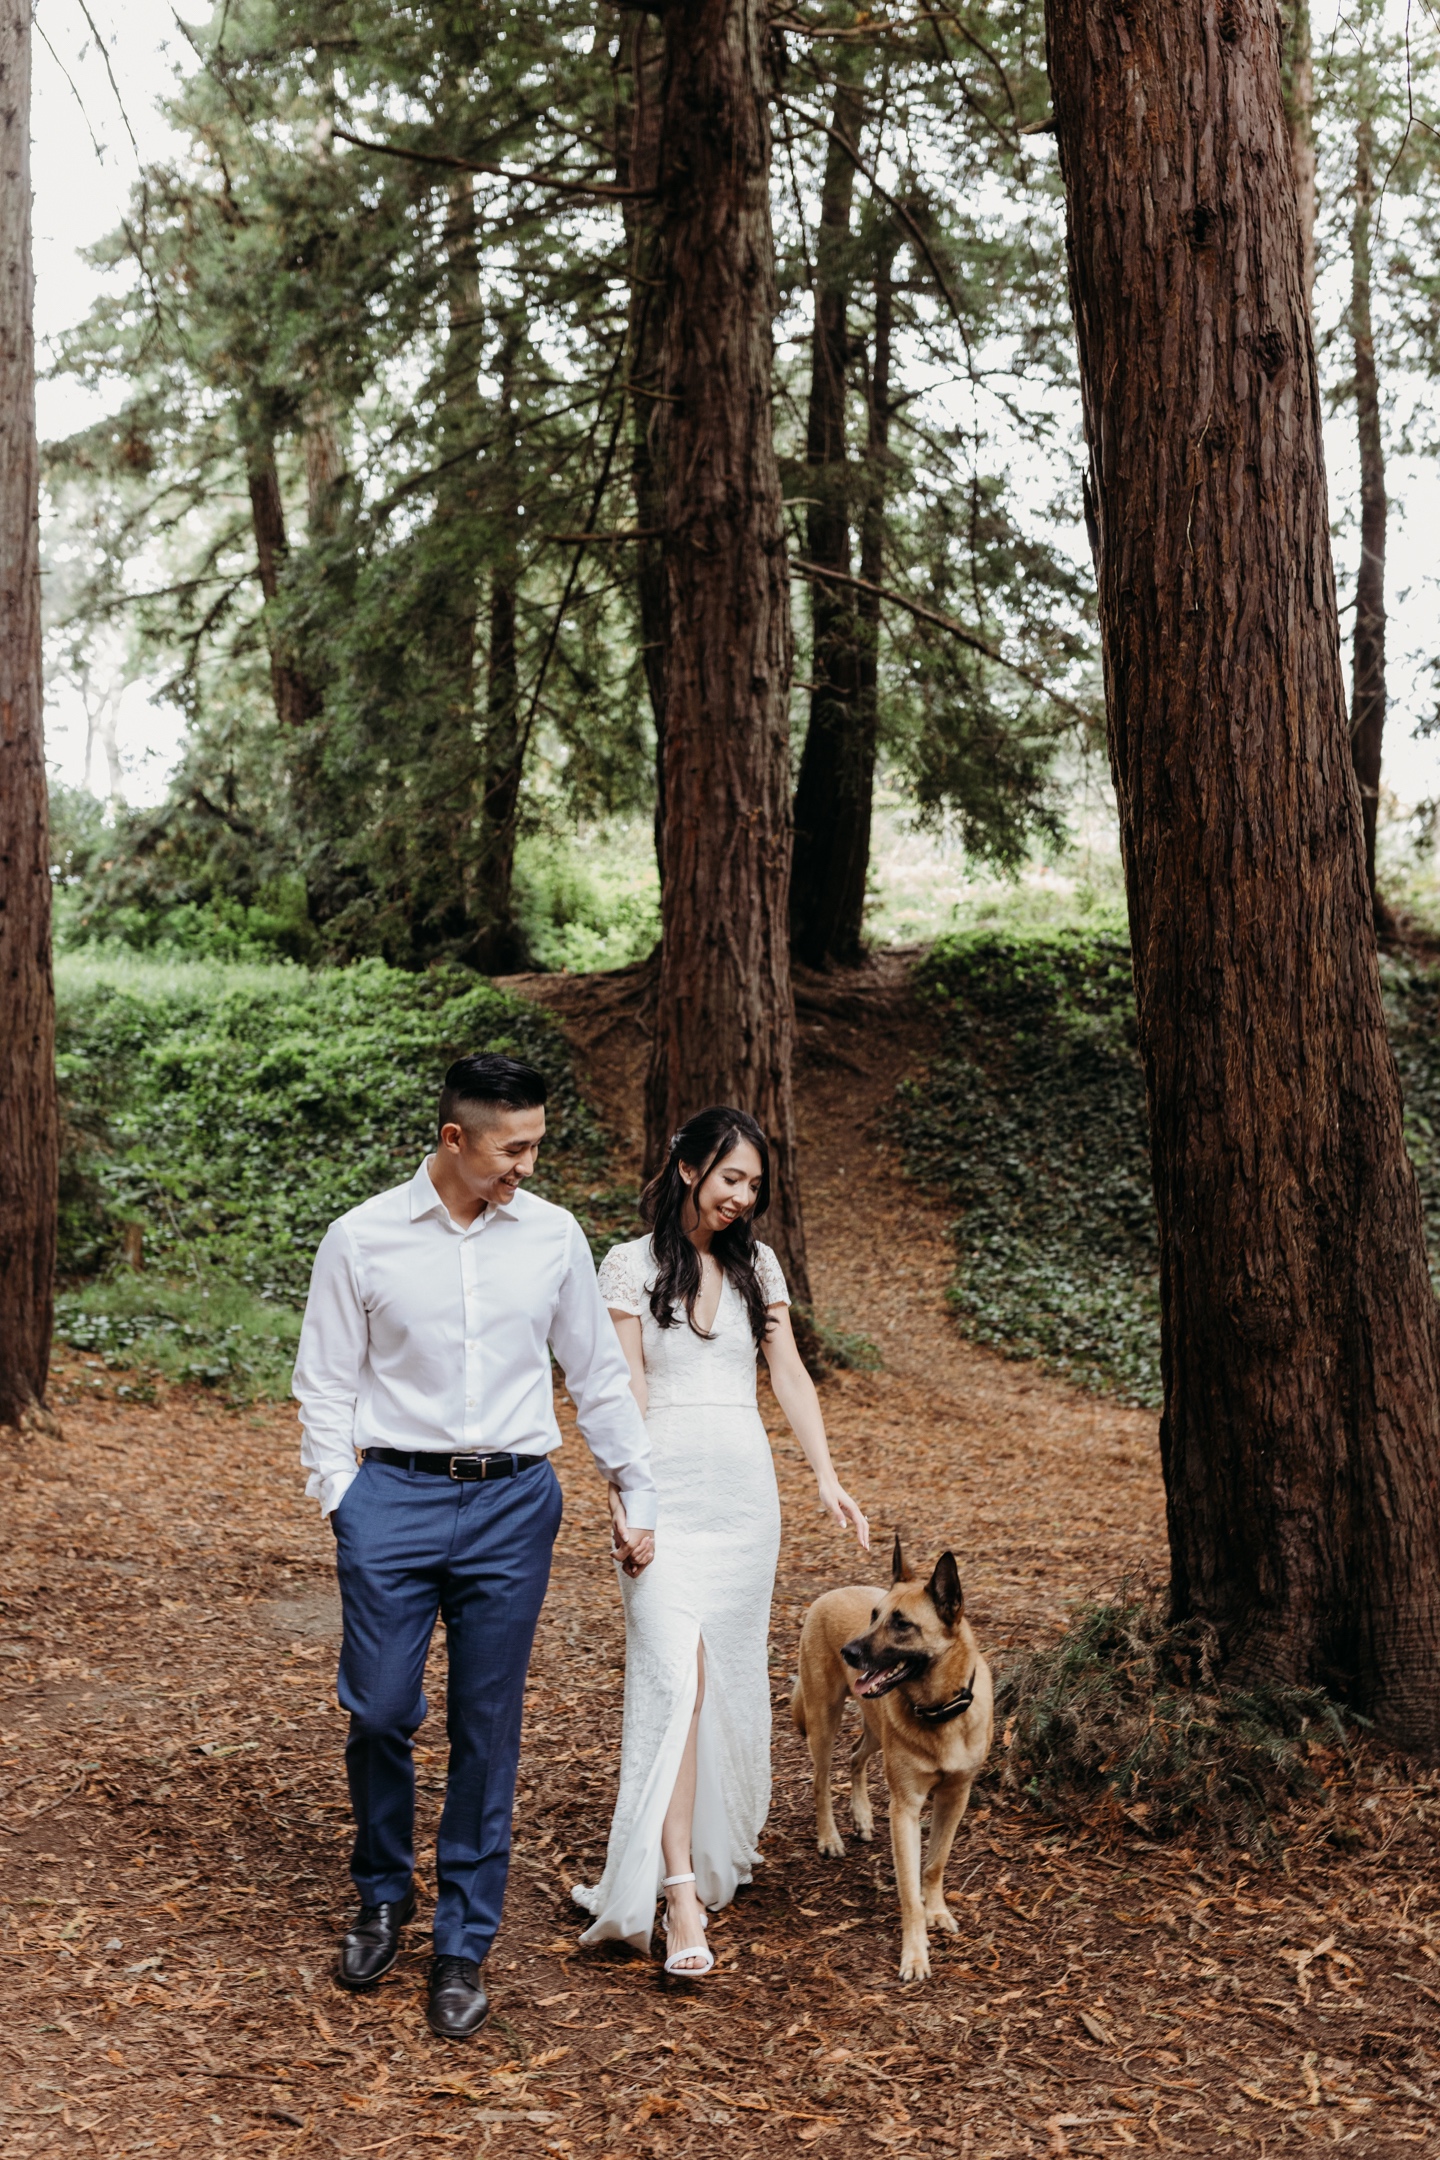 Bride and groom walk down a forest path with their dog in Golden Gate Park, San Francisco. Liz Koston Photography.